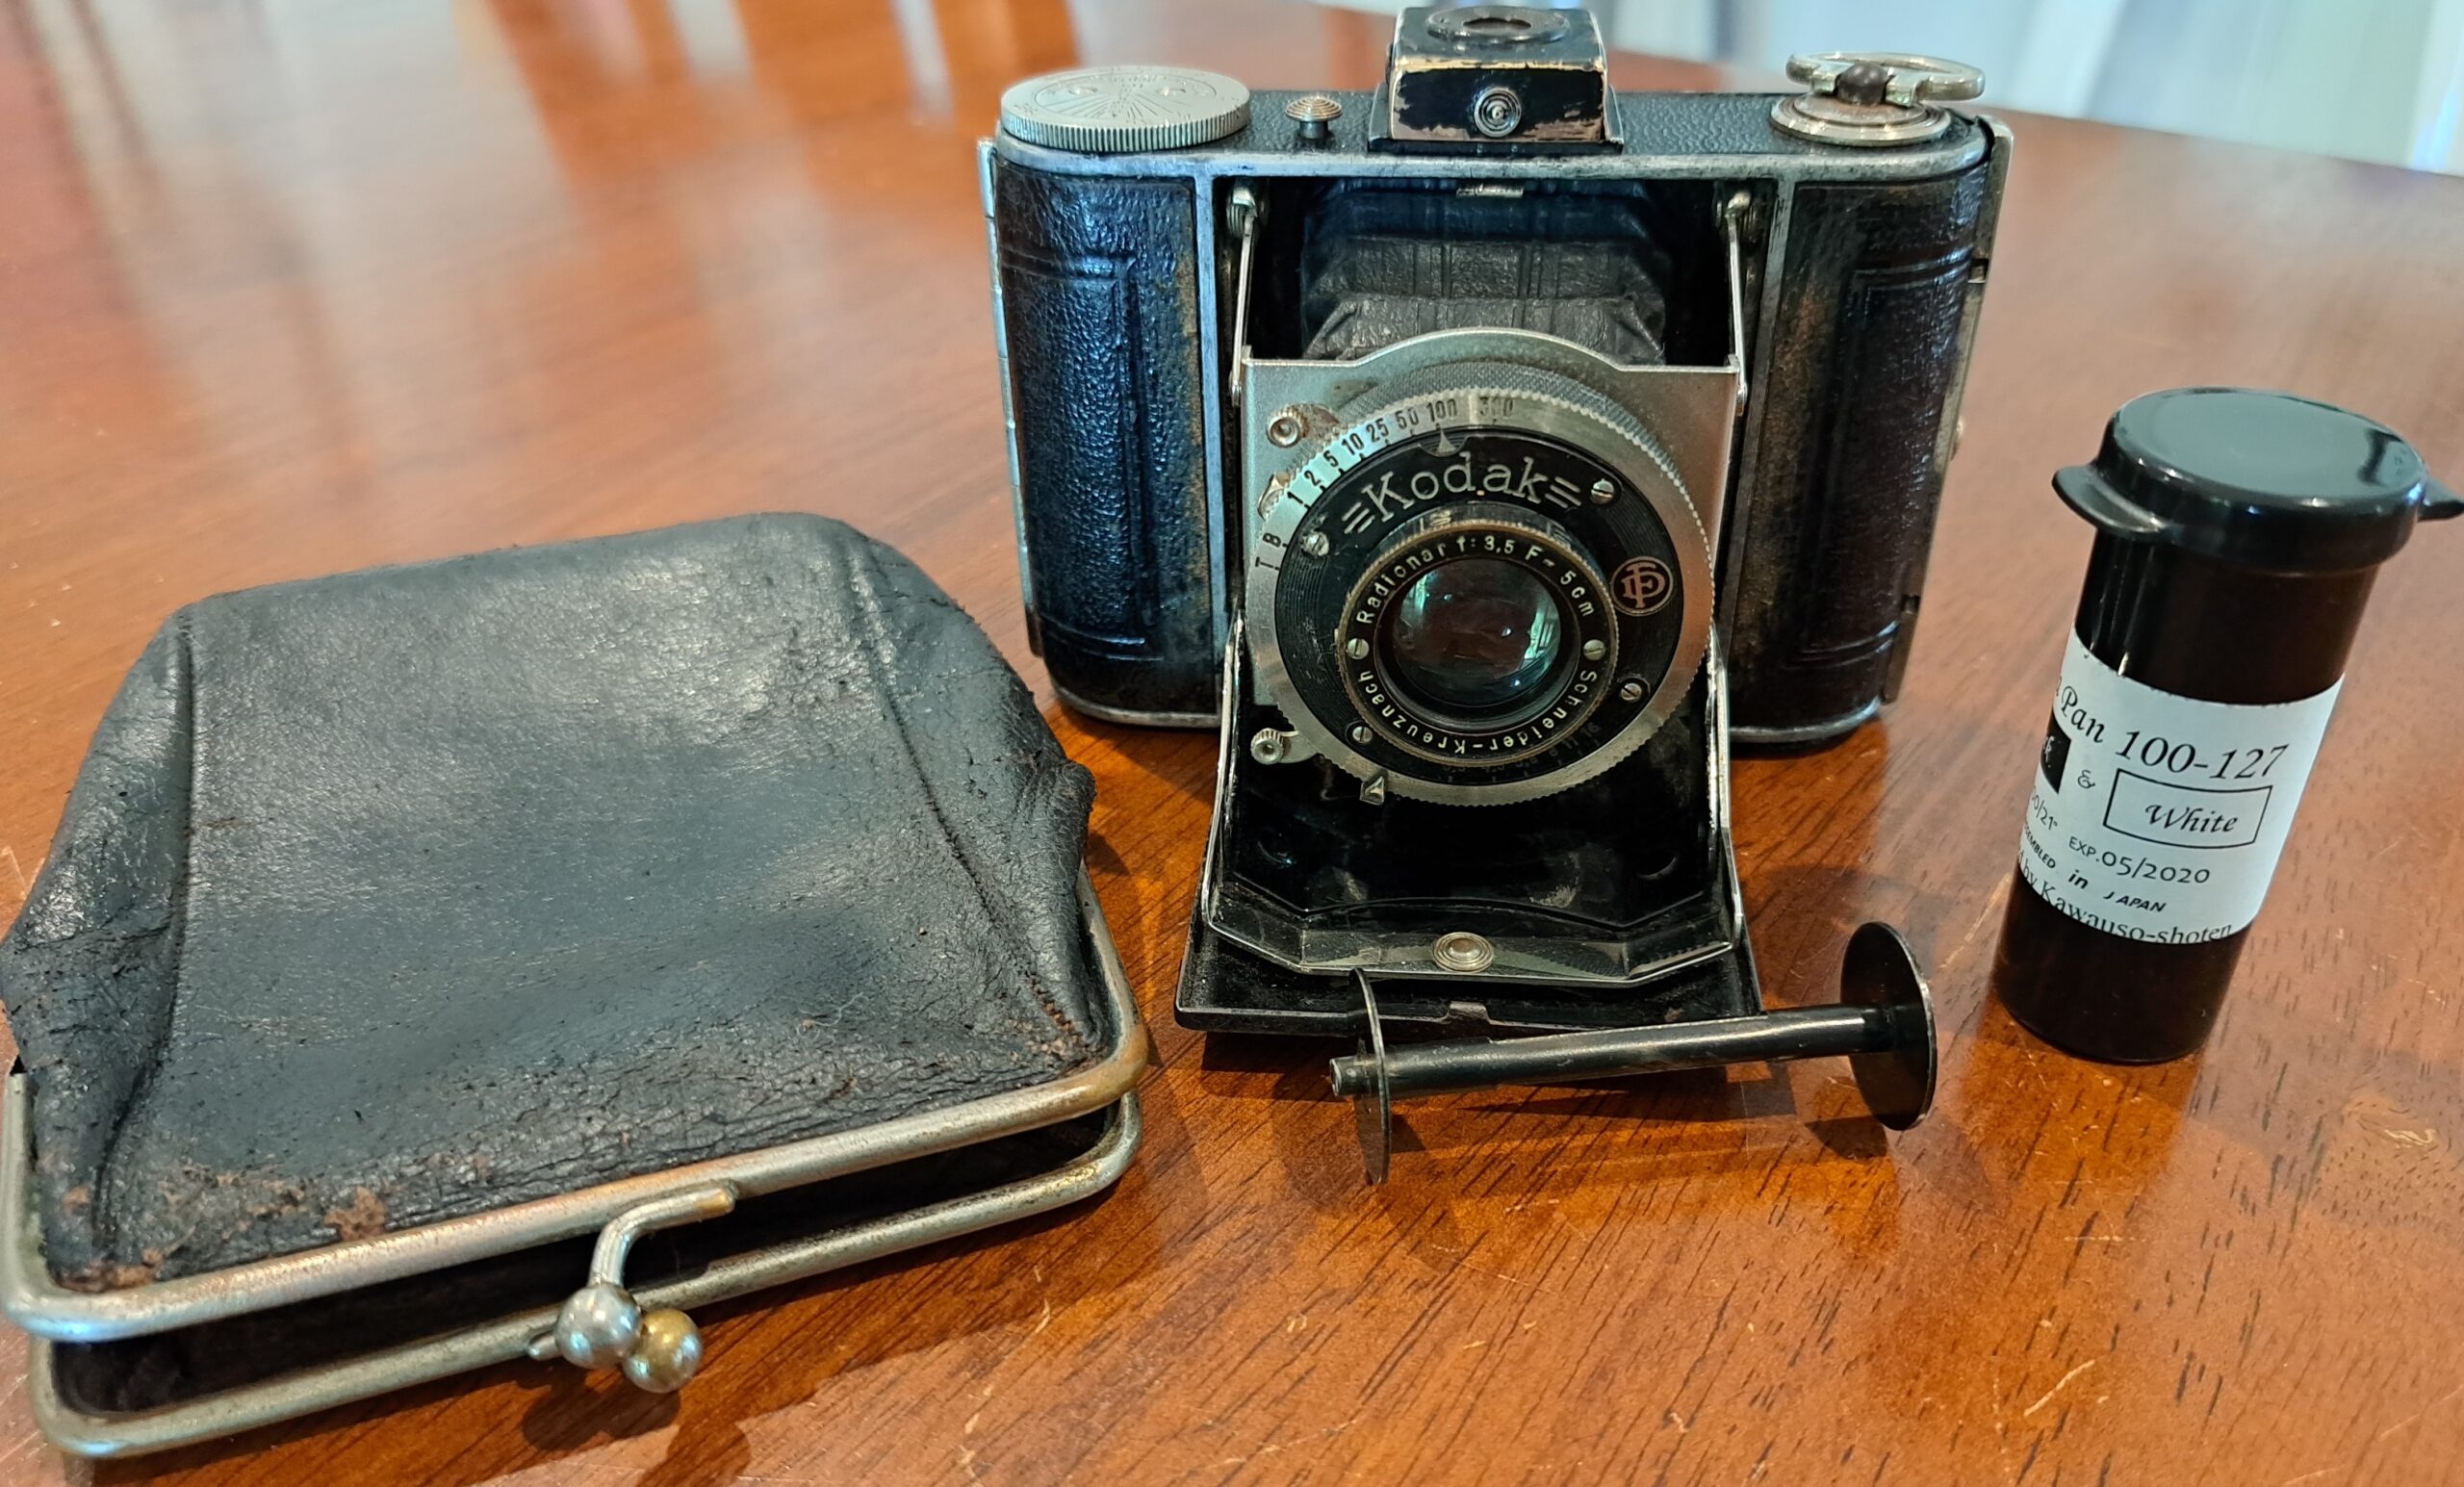 Small vintage fold out camera next to a purse (which it fits into), a roll of ReraPan 100-127 film in a black canister, and a metal 127 take-up spool.